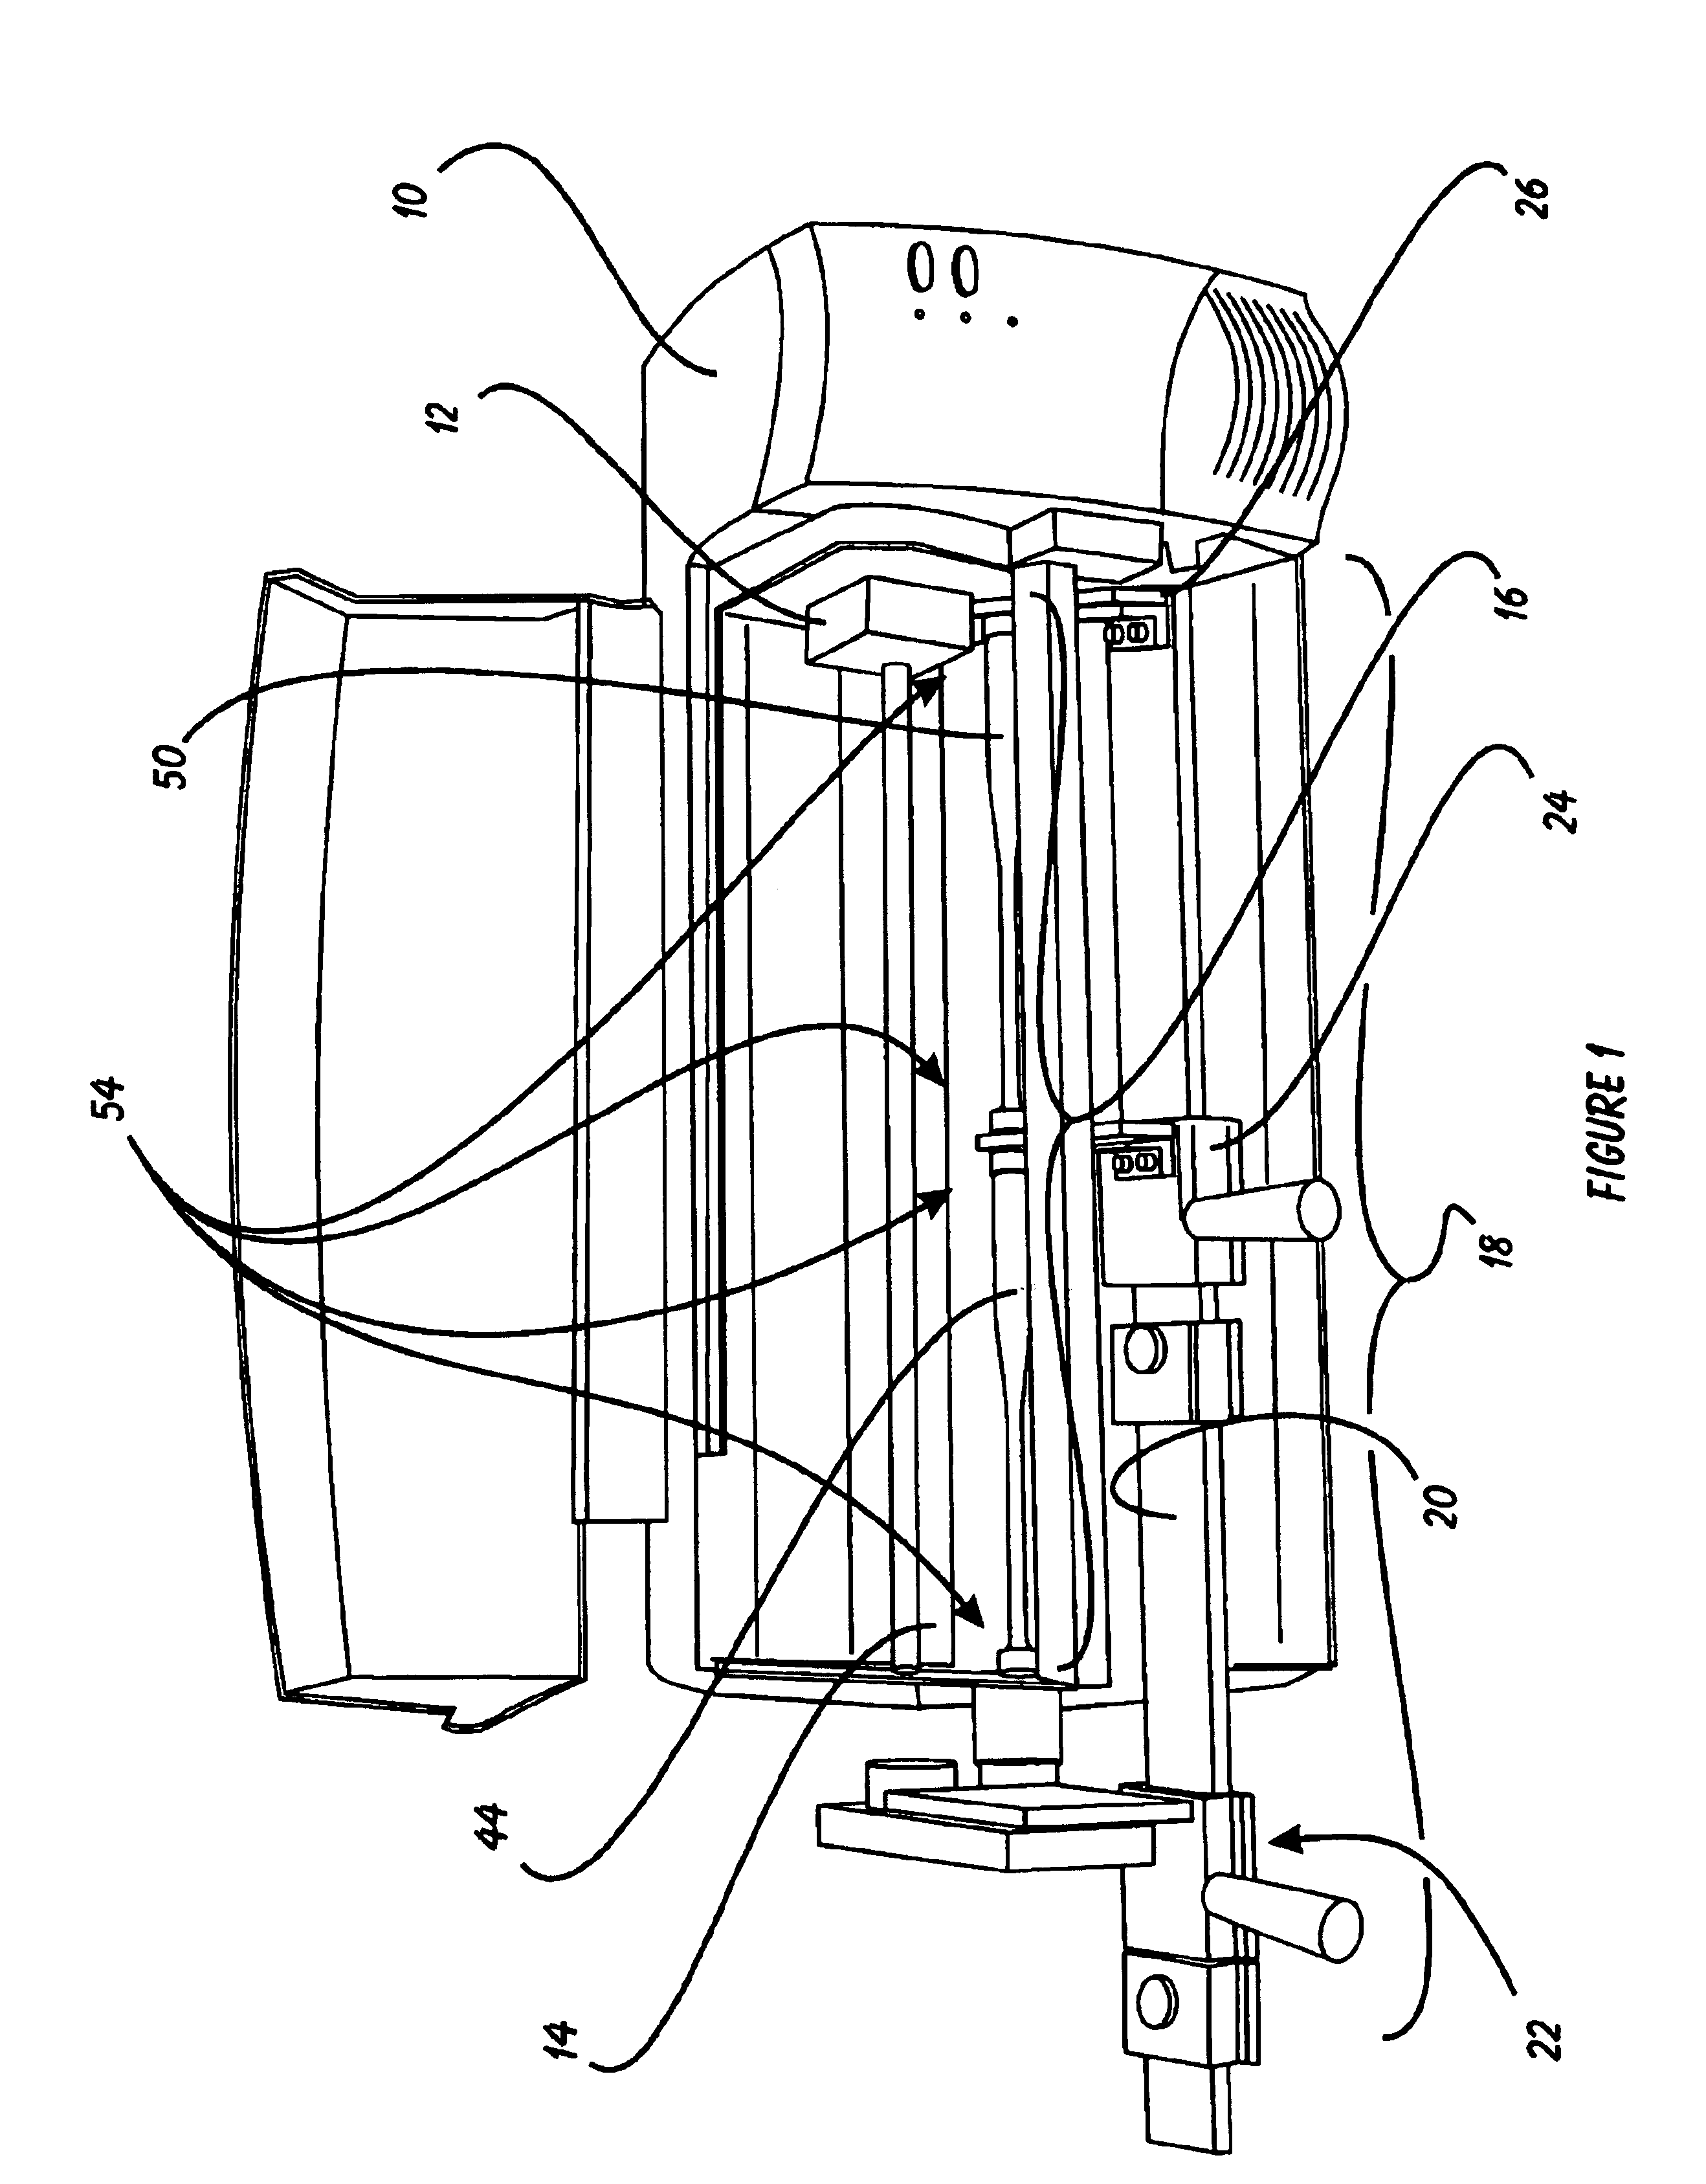 Methods and apparatus for image transfer to multiple articles having non-planar surfaces